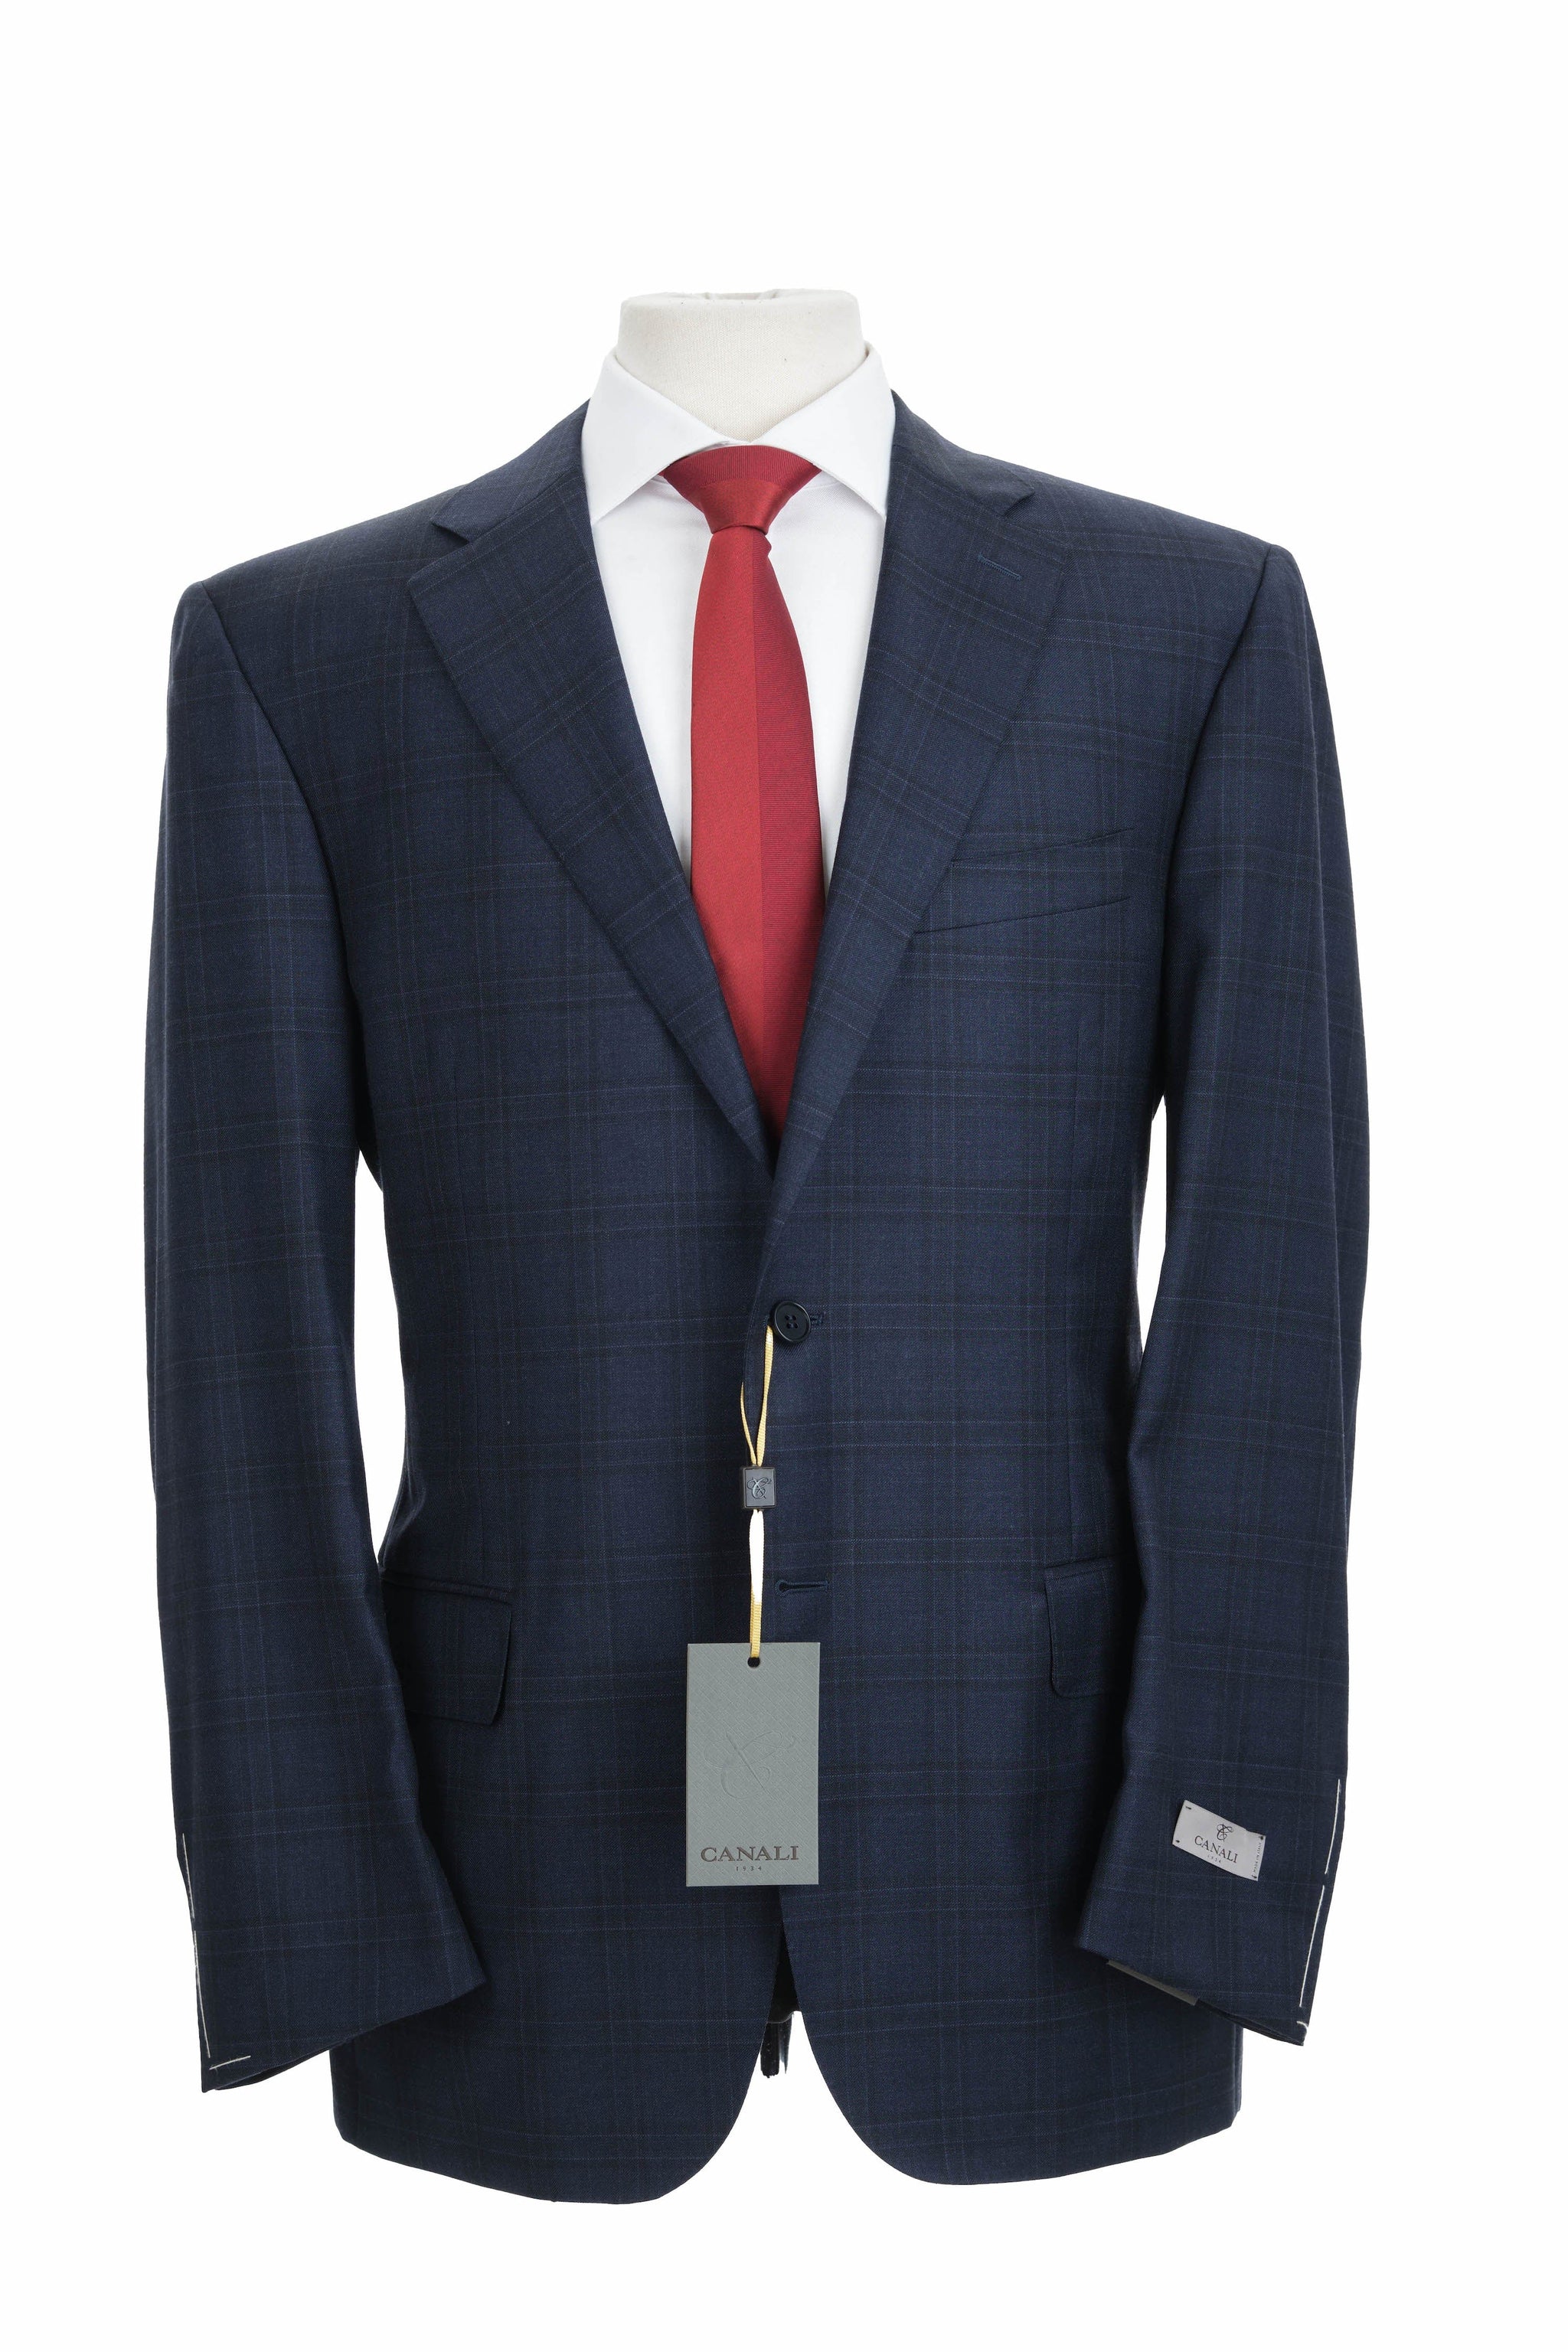 Navy blue Canali Italian suit for men